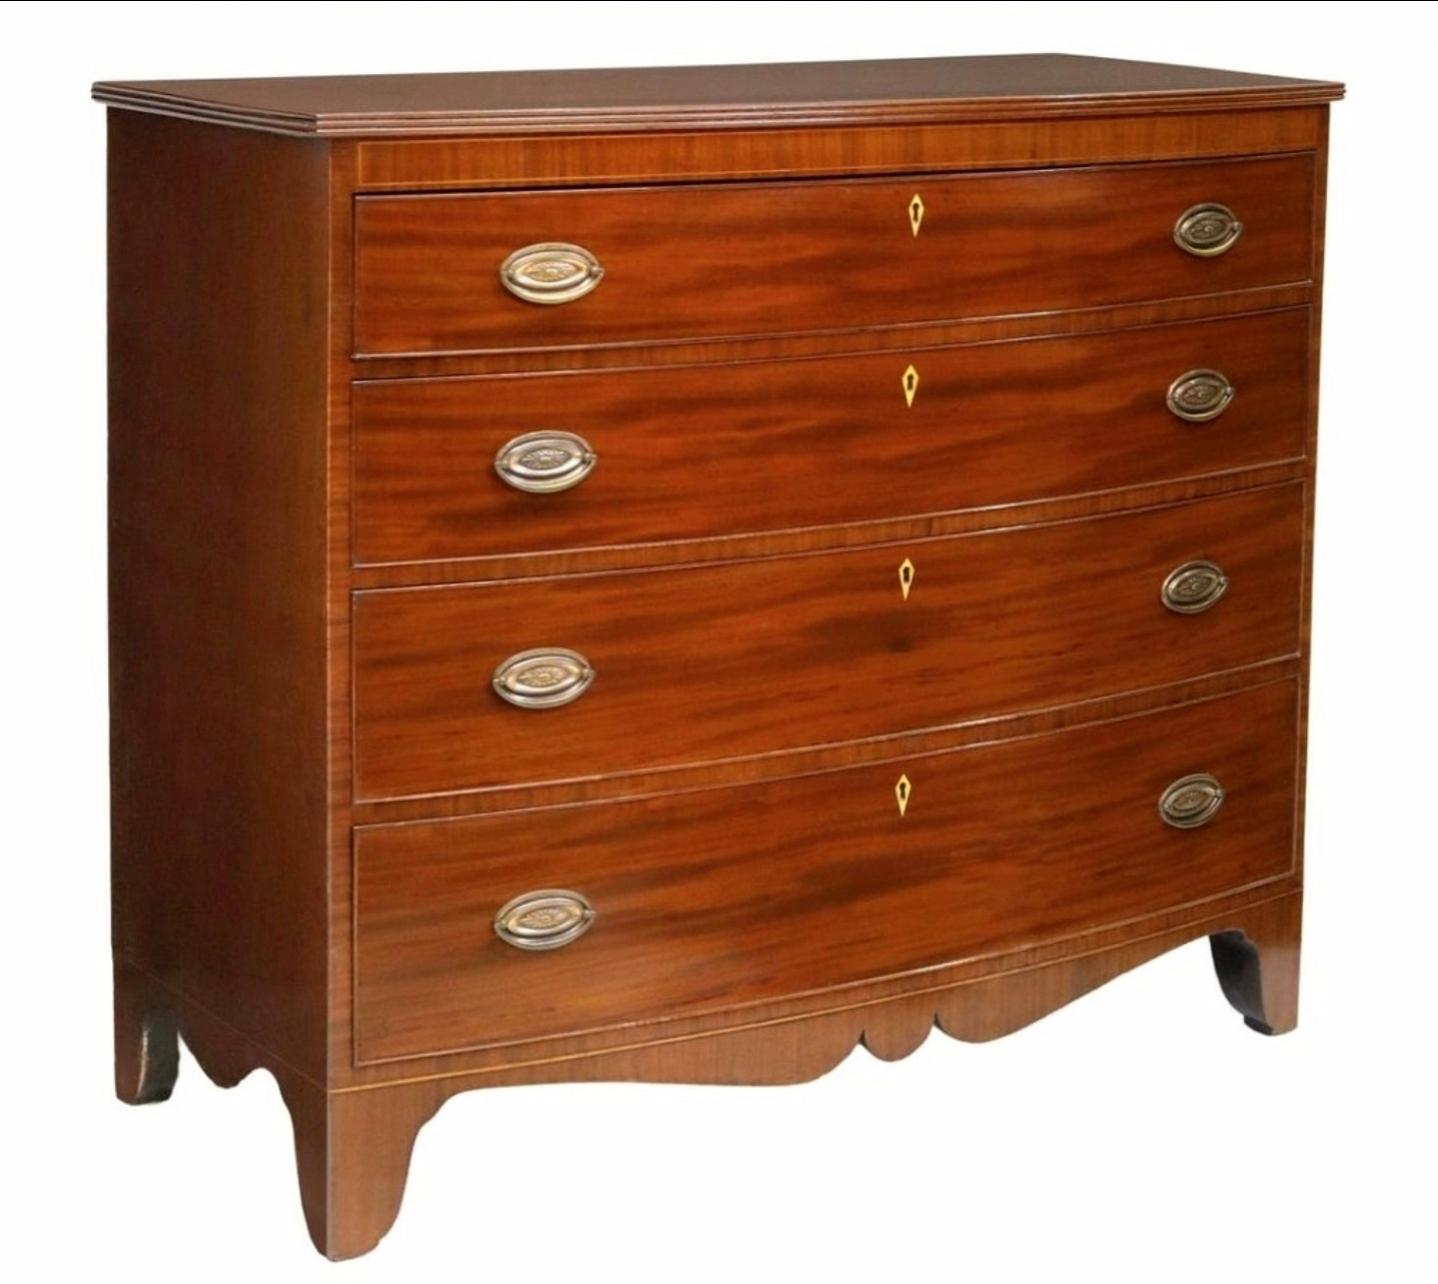 A handsome period George IV (1820-1830) mahogany bow front chest of drawers dresser - commode. 

Hand-crafted in the United Kingdom in the early 19th century, luxurious and refined English Georgian Regency style, featuring high-quality solid wood